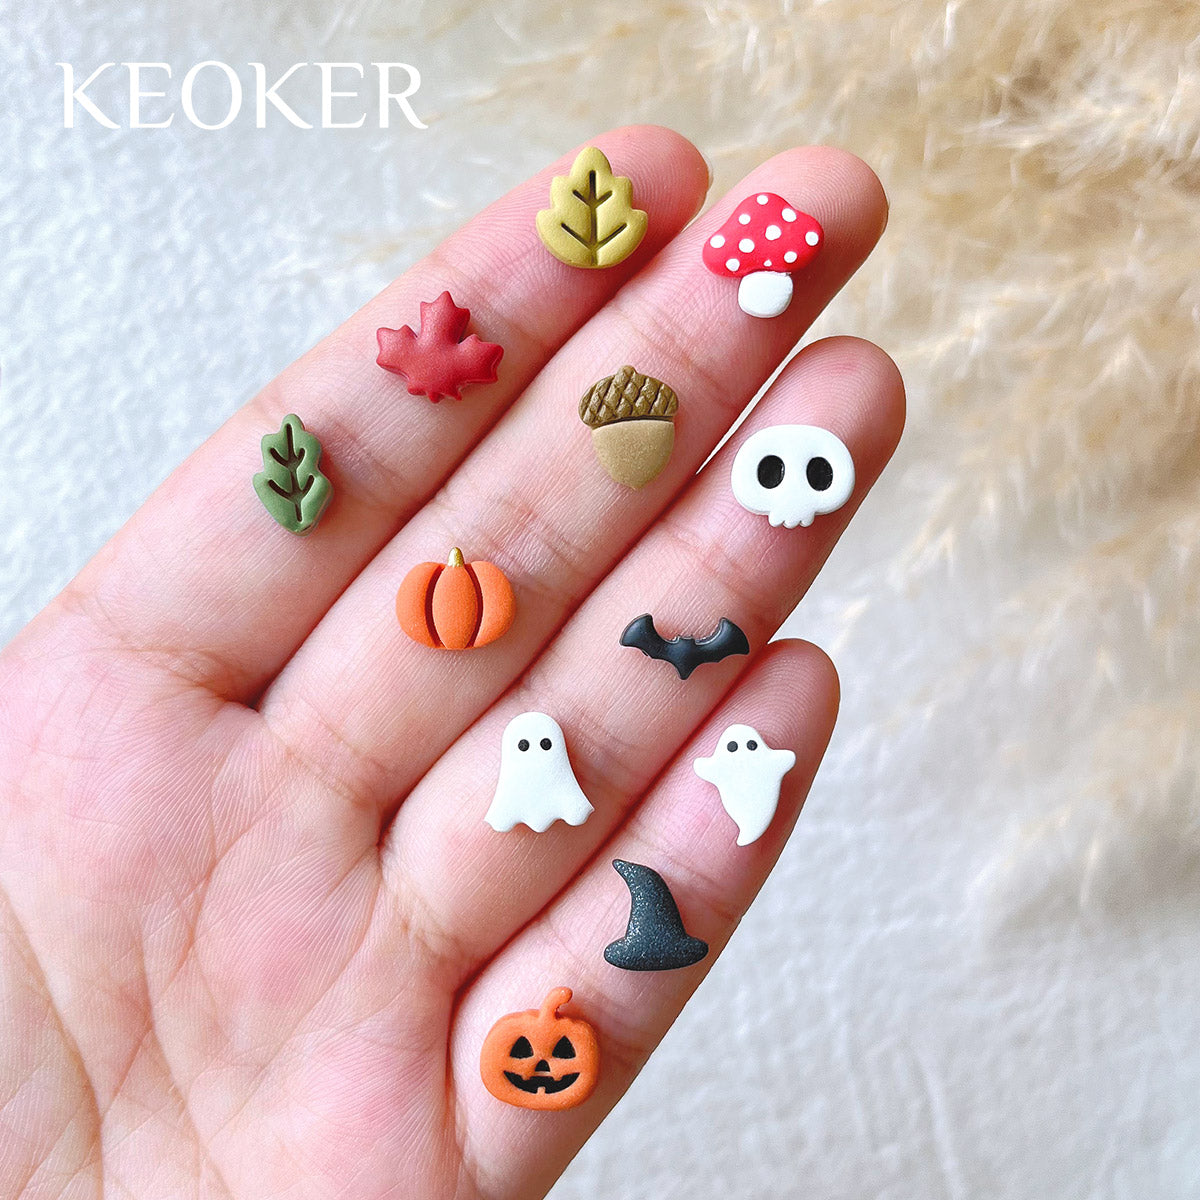 KEOKER Halloween Polymer Clay Cutters, Clay cutters for Halloween Earrings  Making, 20 Shapes Halloween Clay Earrings Cutters, Pumpkin Clay Cutters For